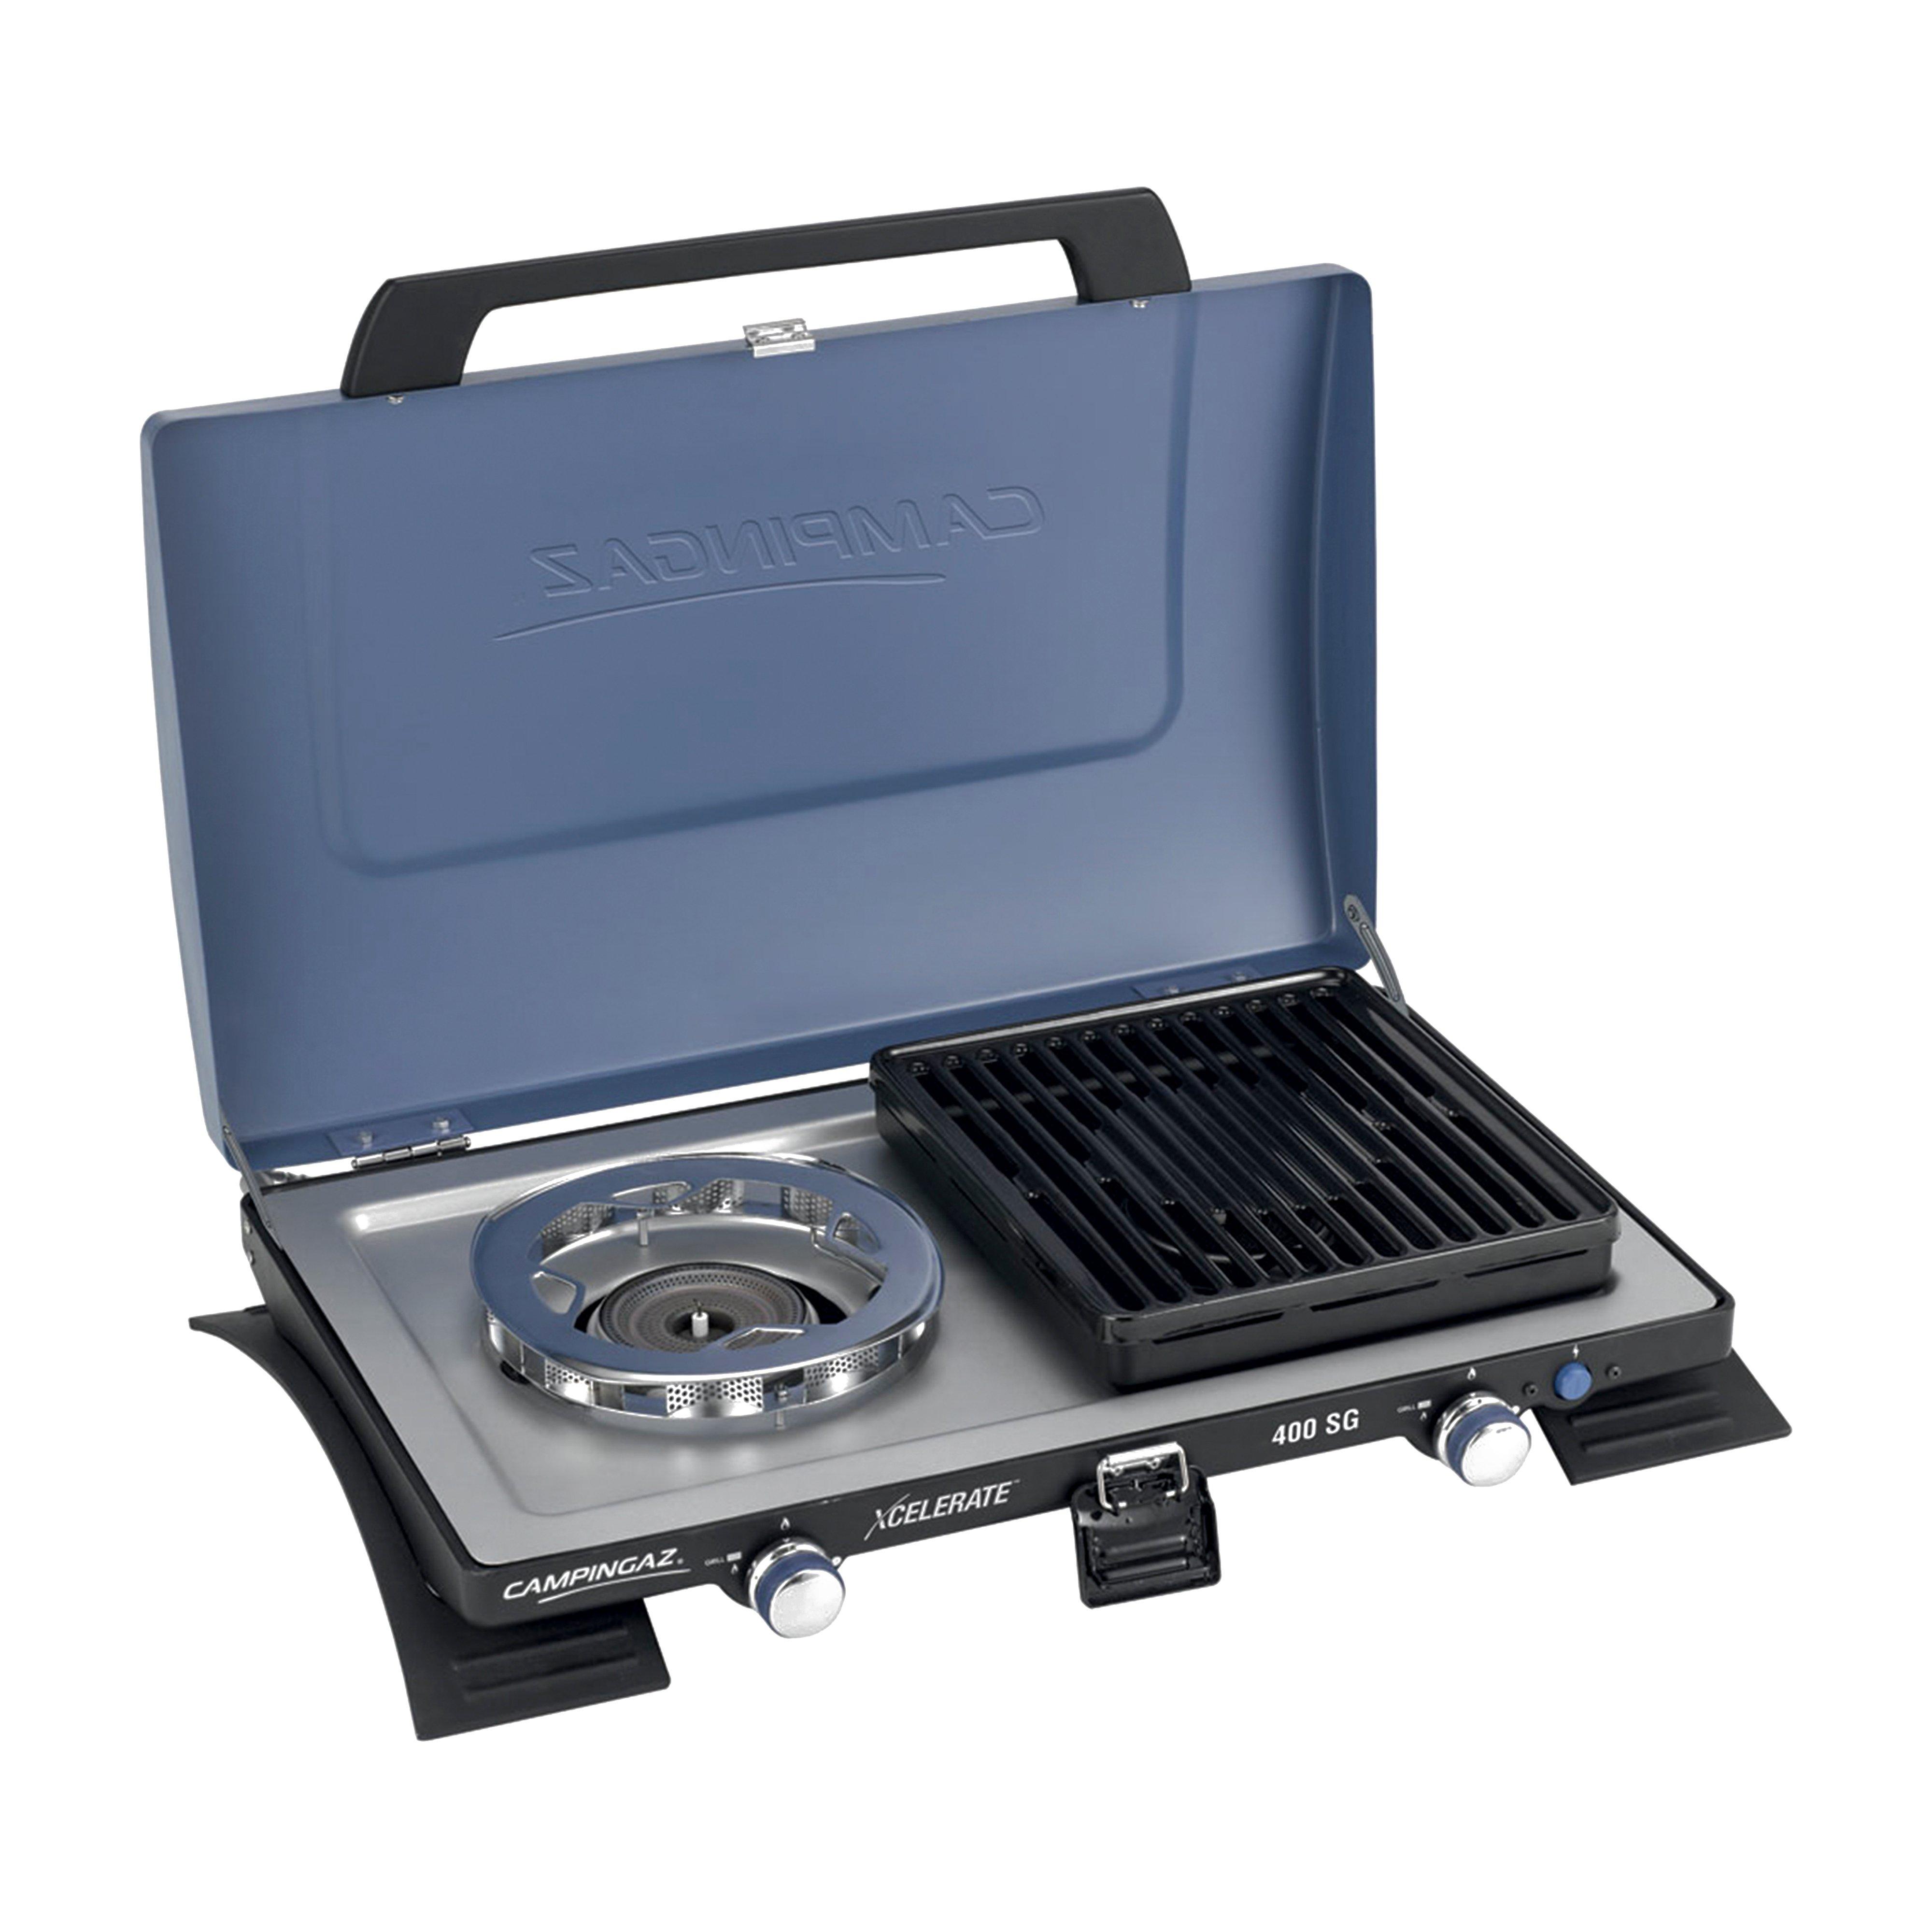 Campingaz 400 SG Xcelerate Double Burner & Grill Review